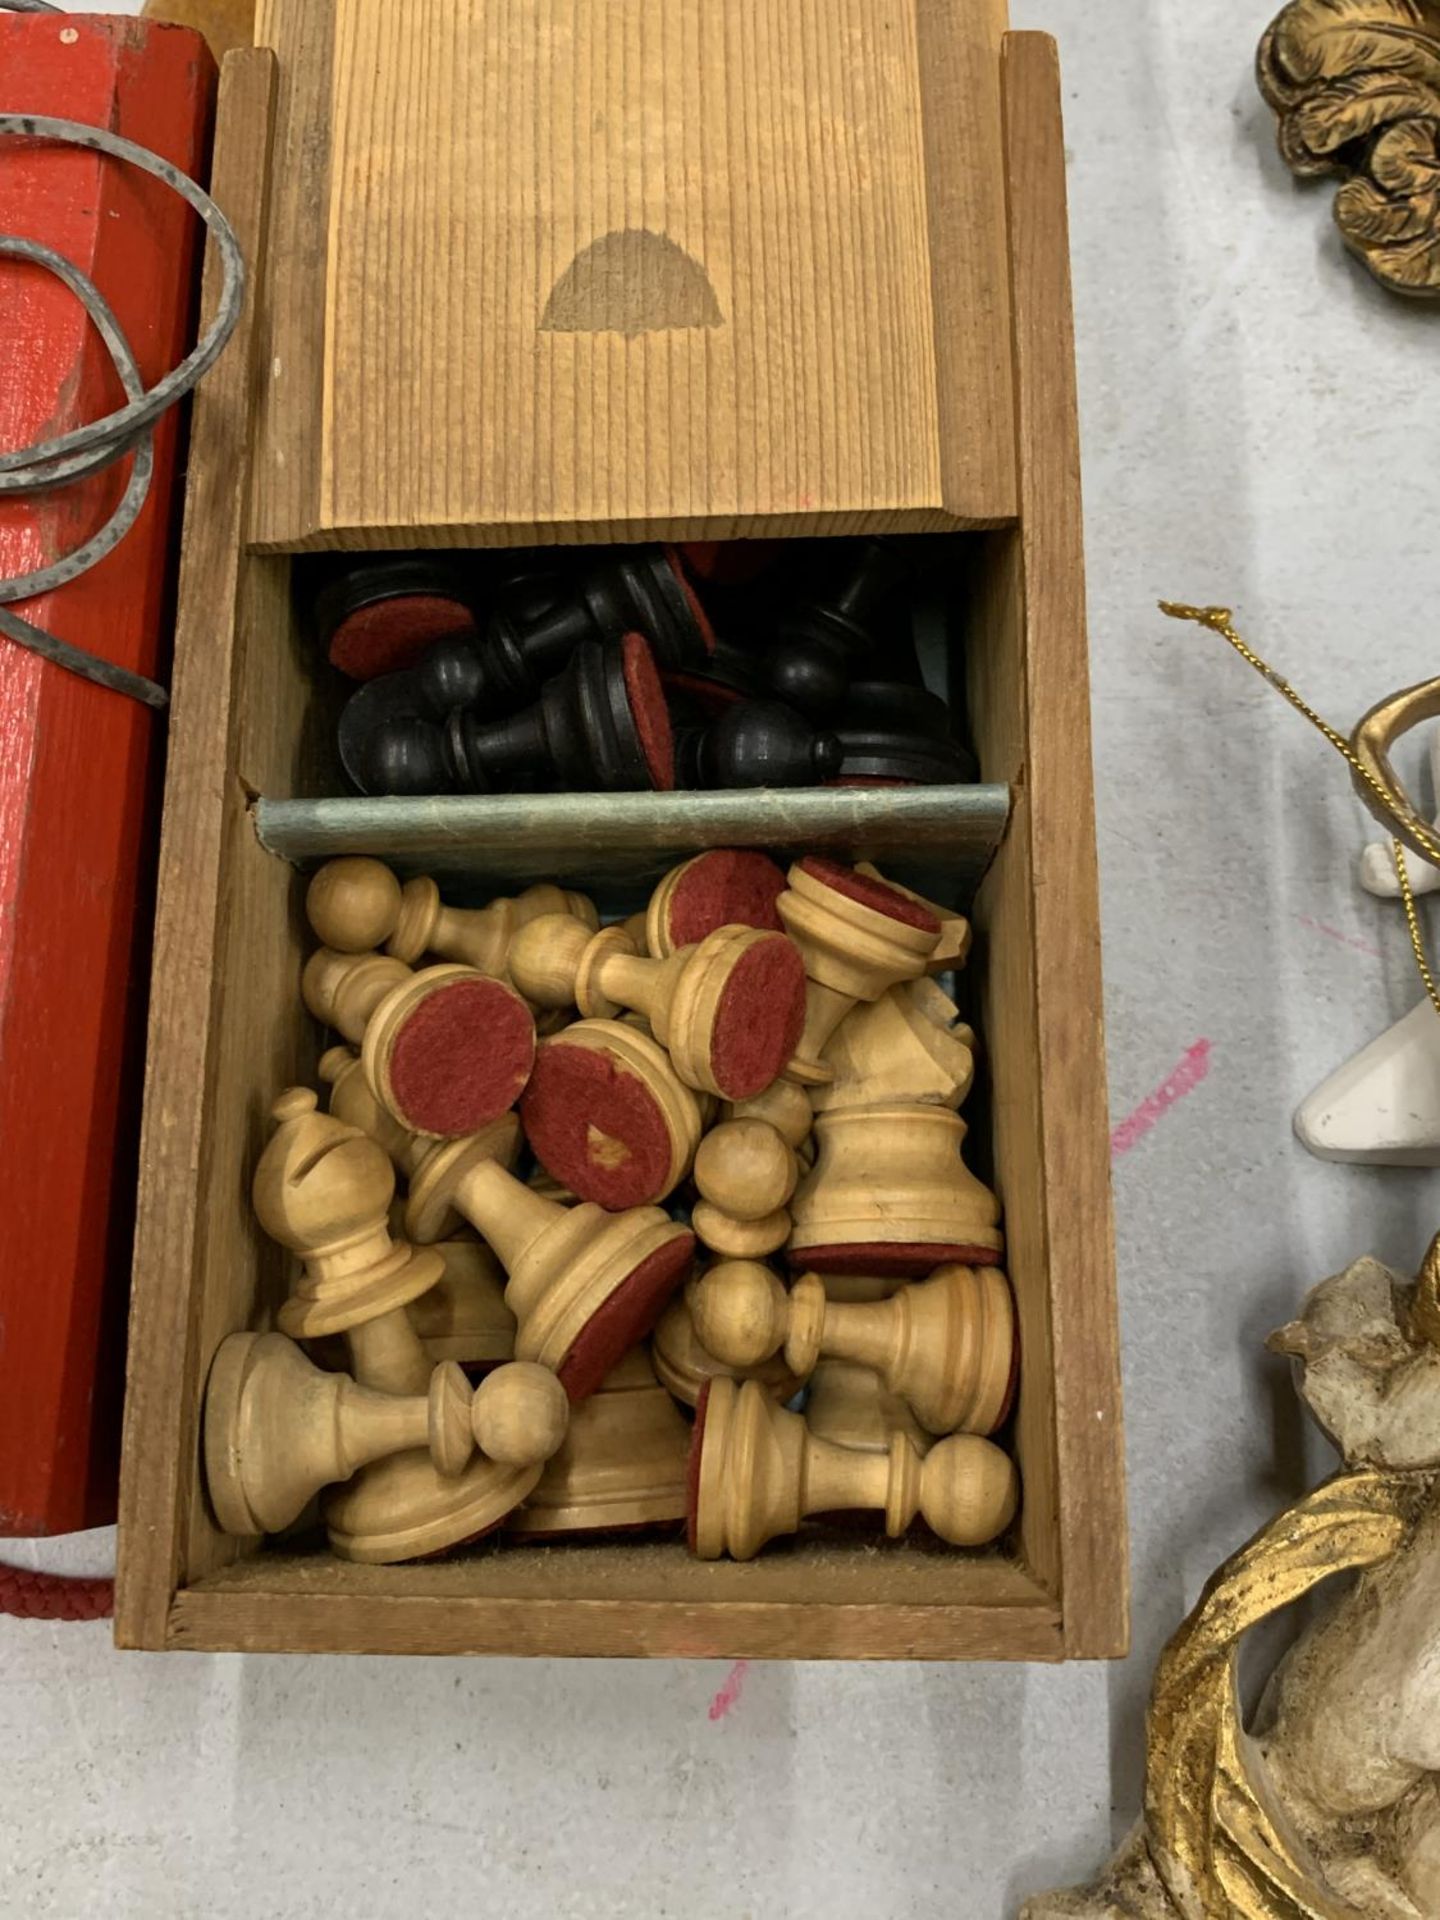 A BOXED SET OF CHESS PIECES AND A 'JOKARI' GAME WITH TWO WOODEN BATS - Image 3 of 3